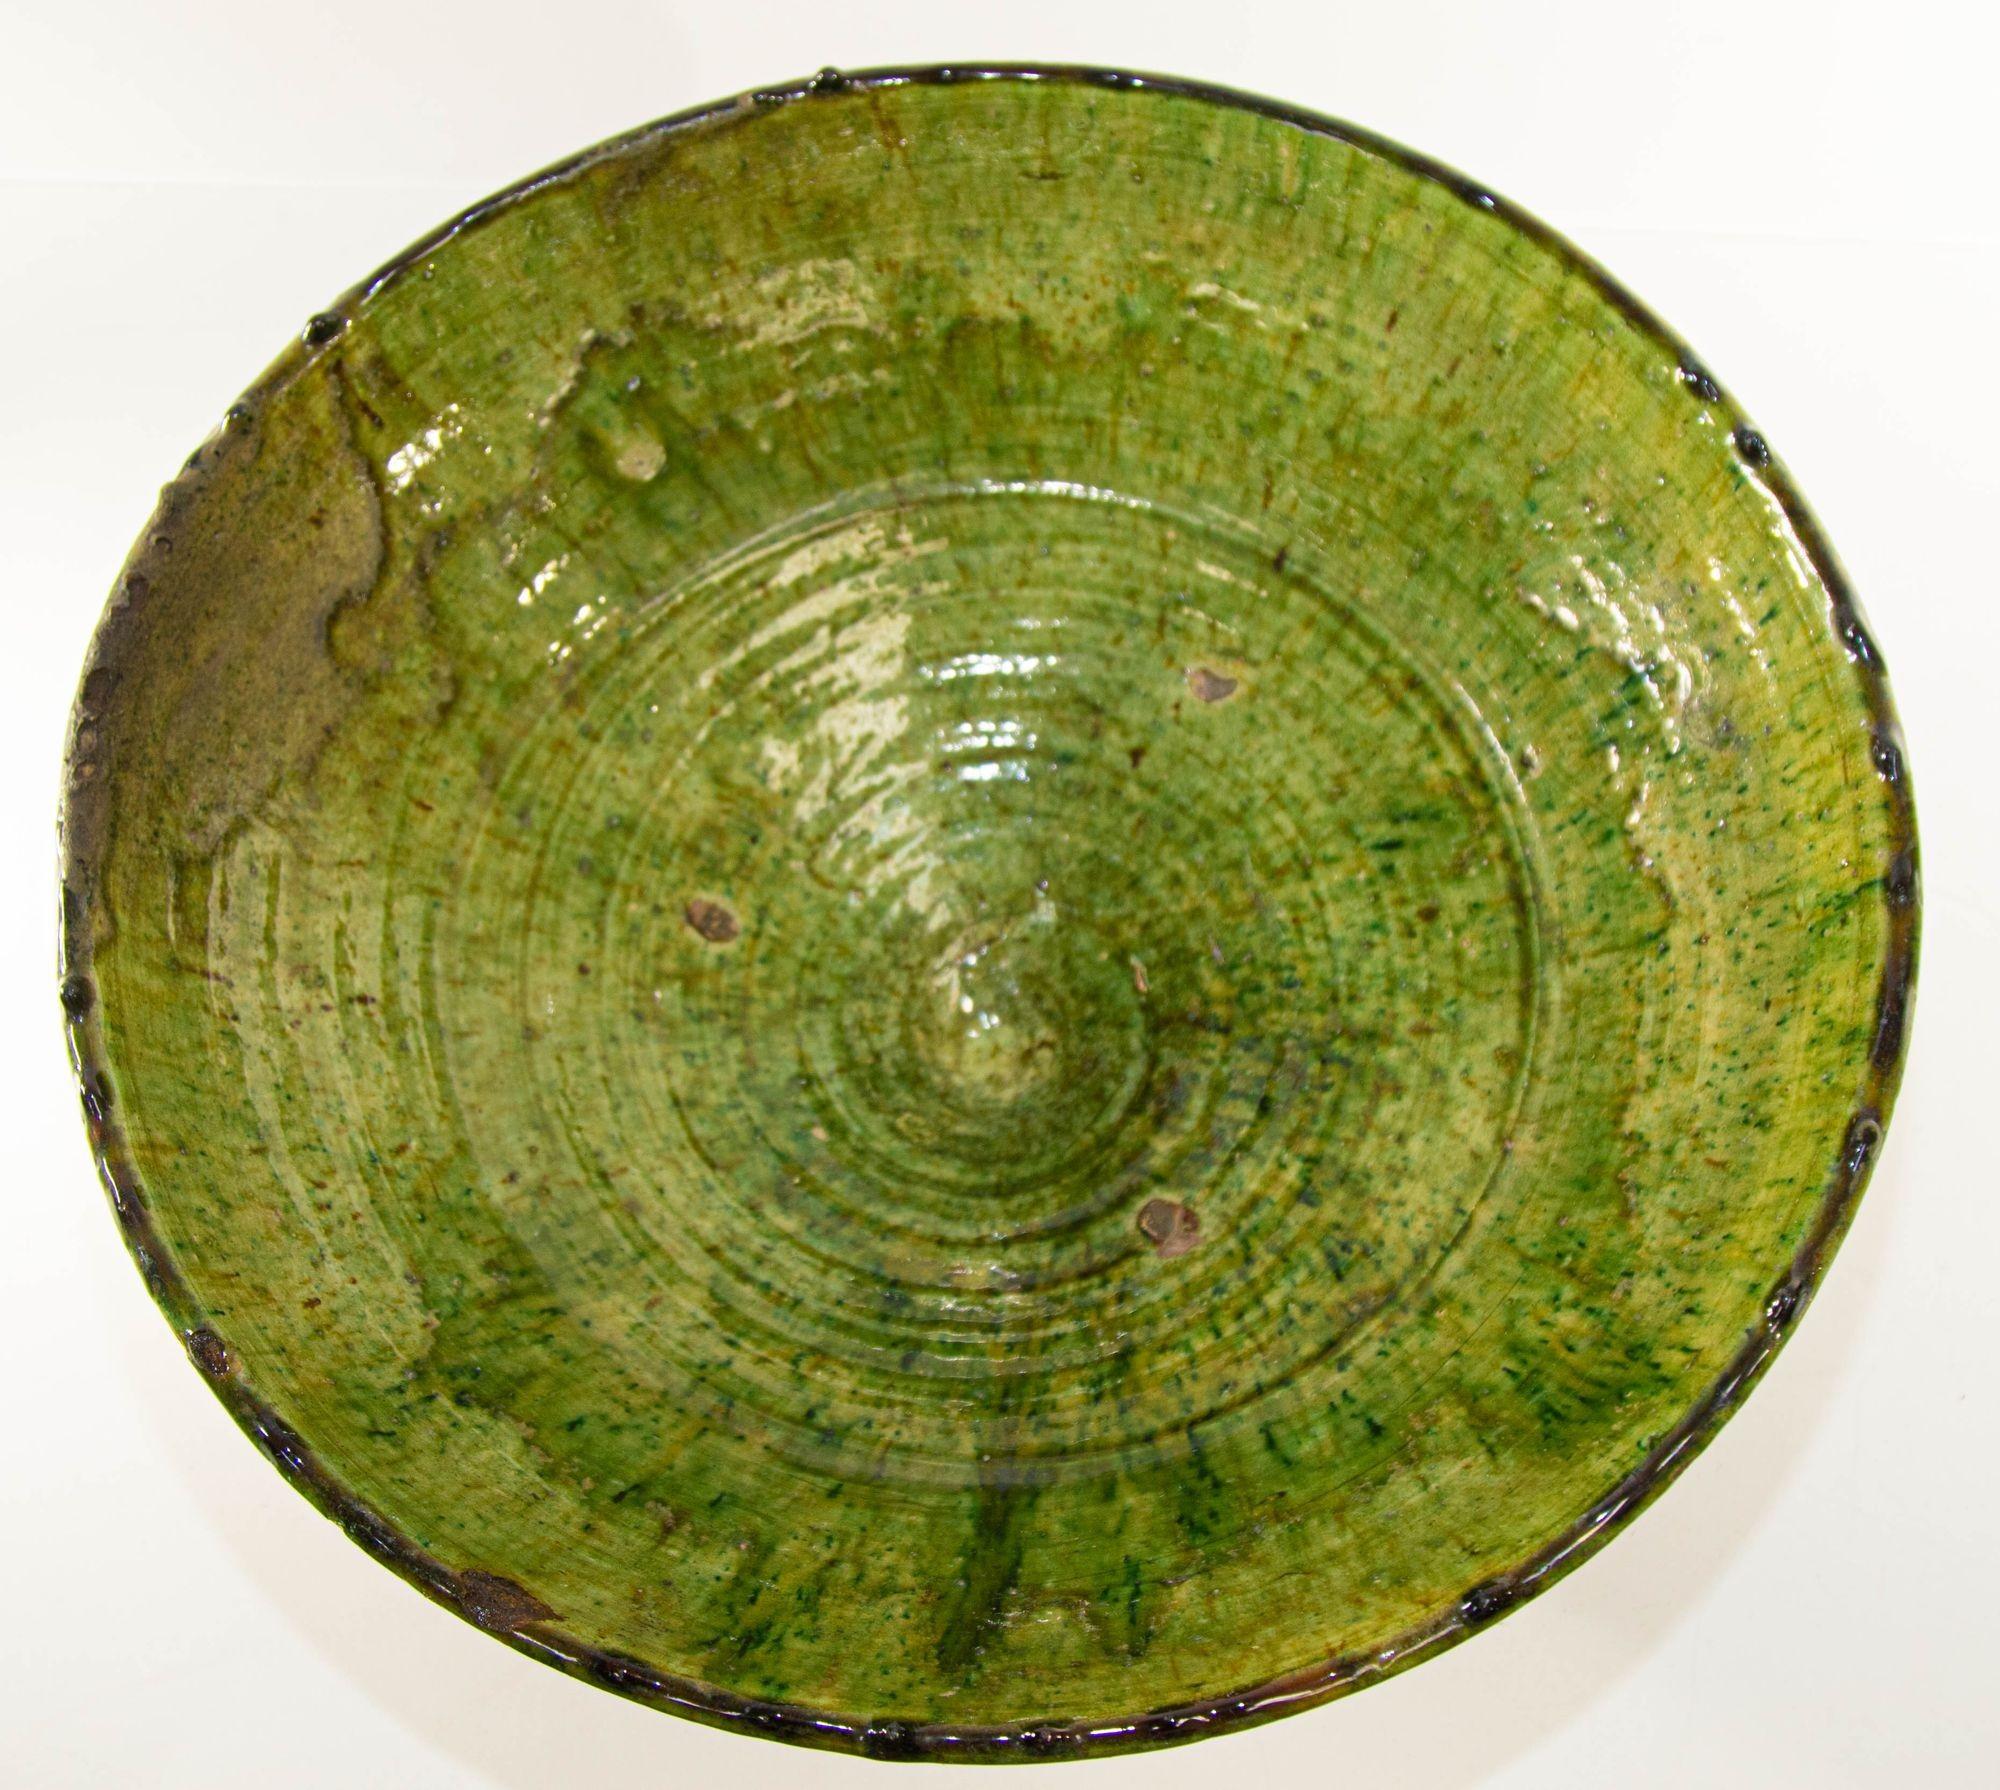 Vintage Moroccan Tamgroute Bowl Green Glazed Terra Cotta For Sale 7